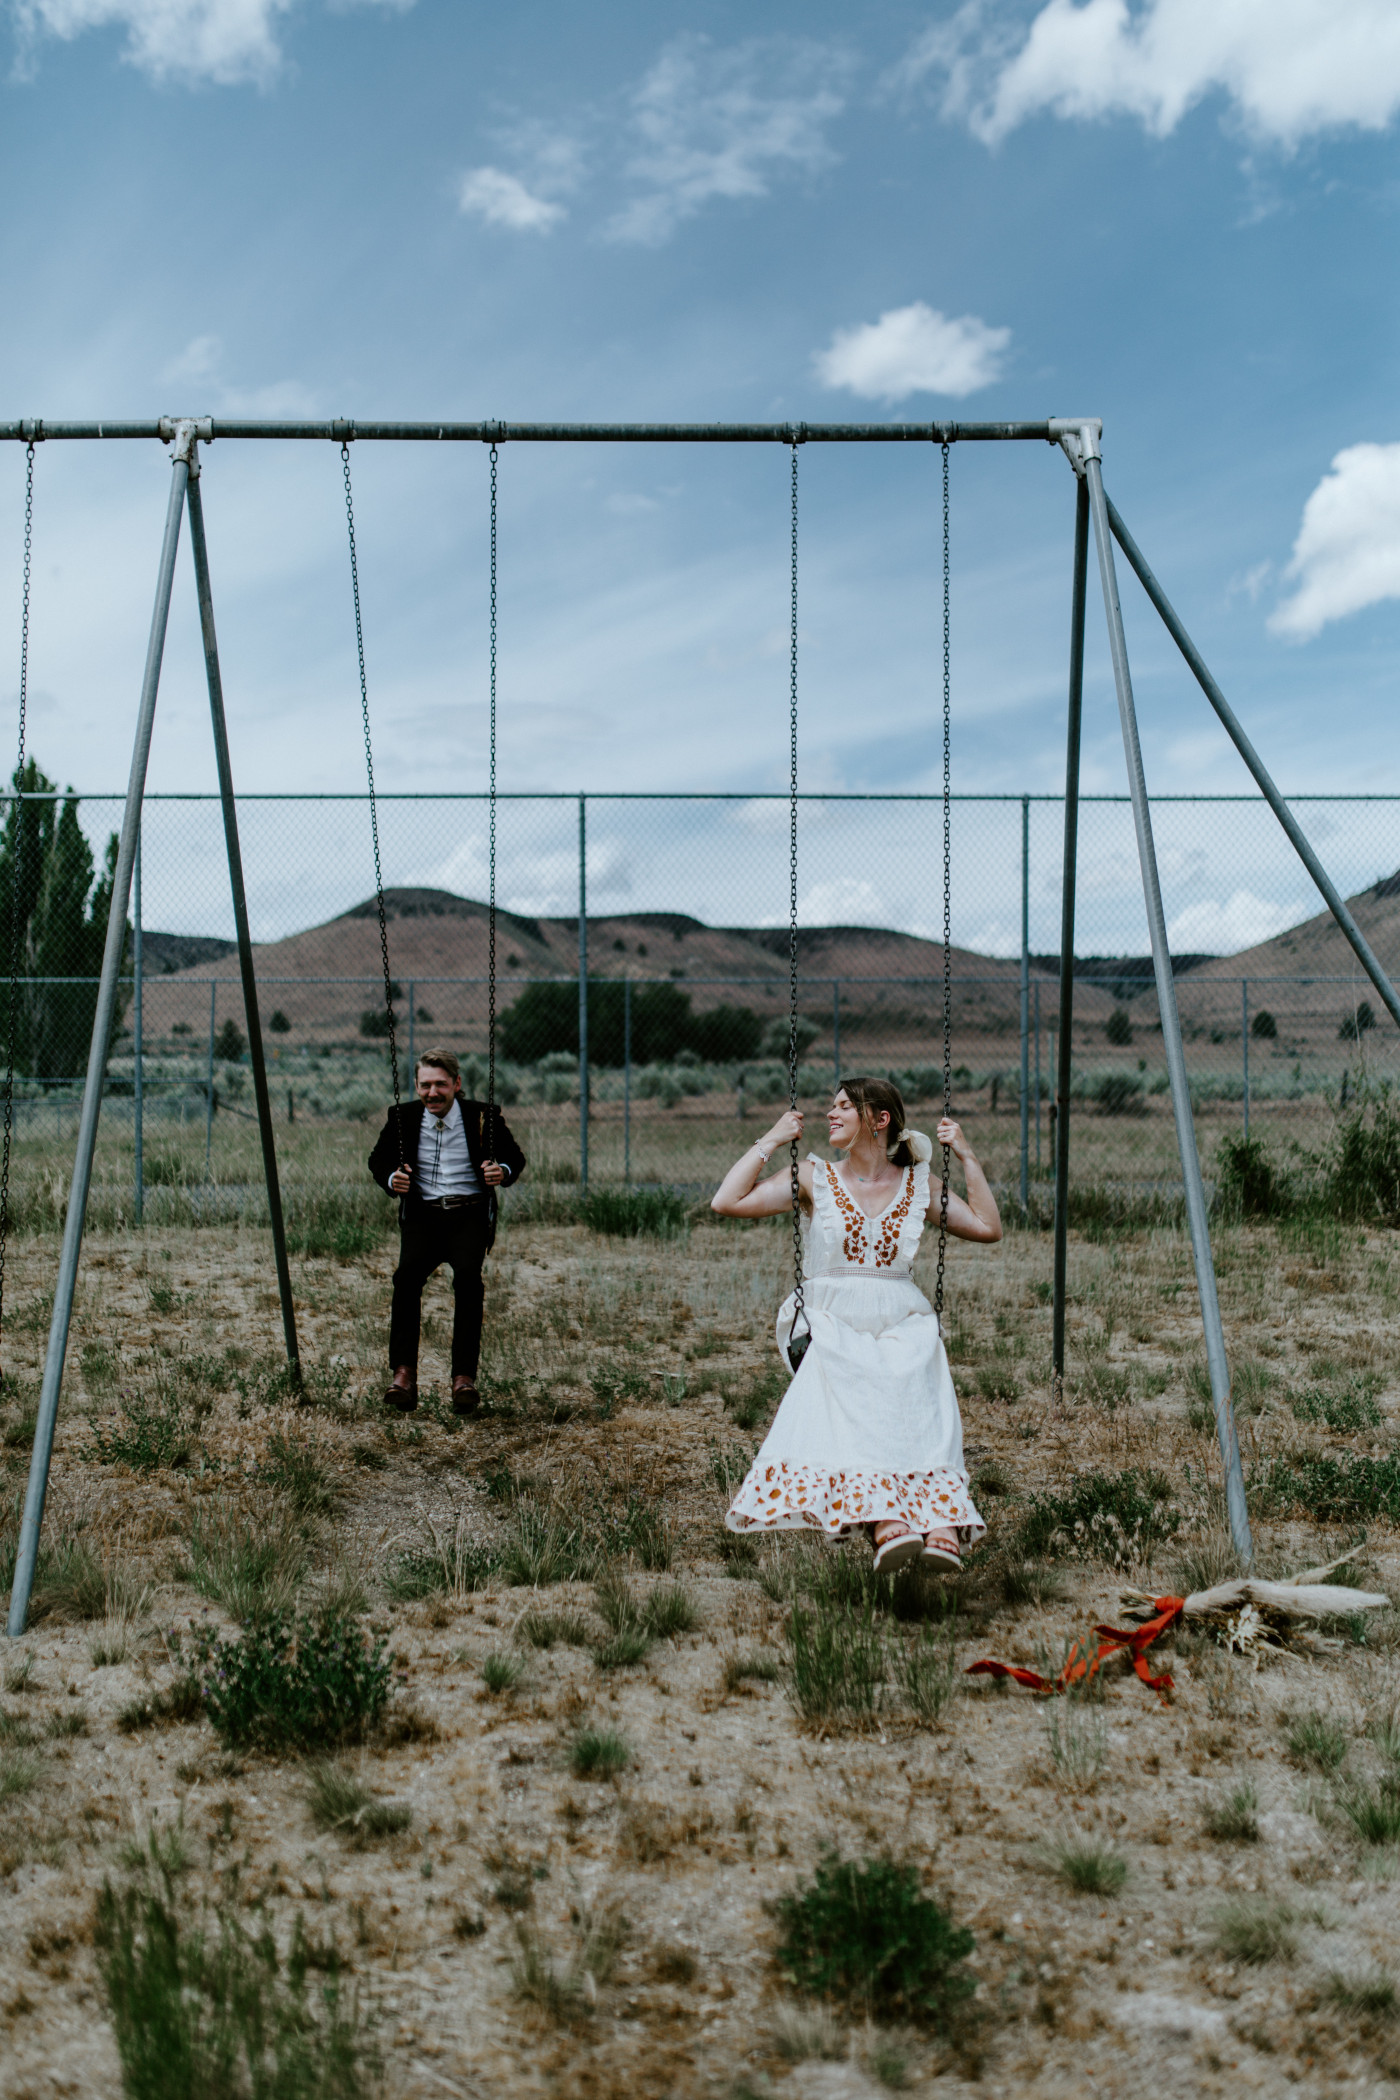 Emily and Greyson on a swing set. Elopement photography in the Central Oregon desert by Sienna Plus Josh.